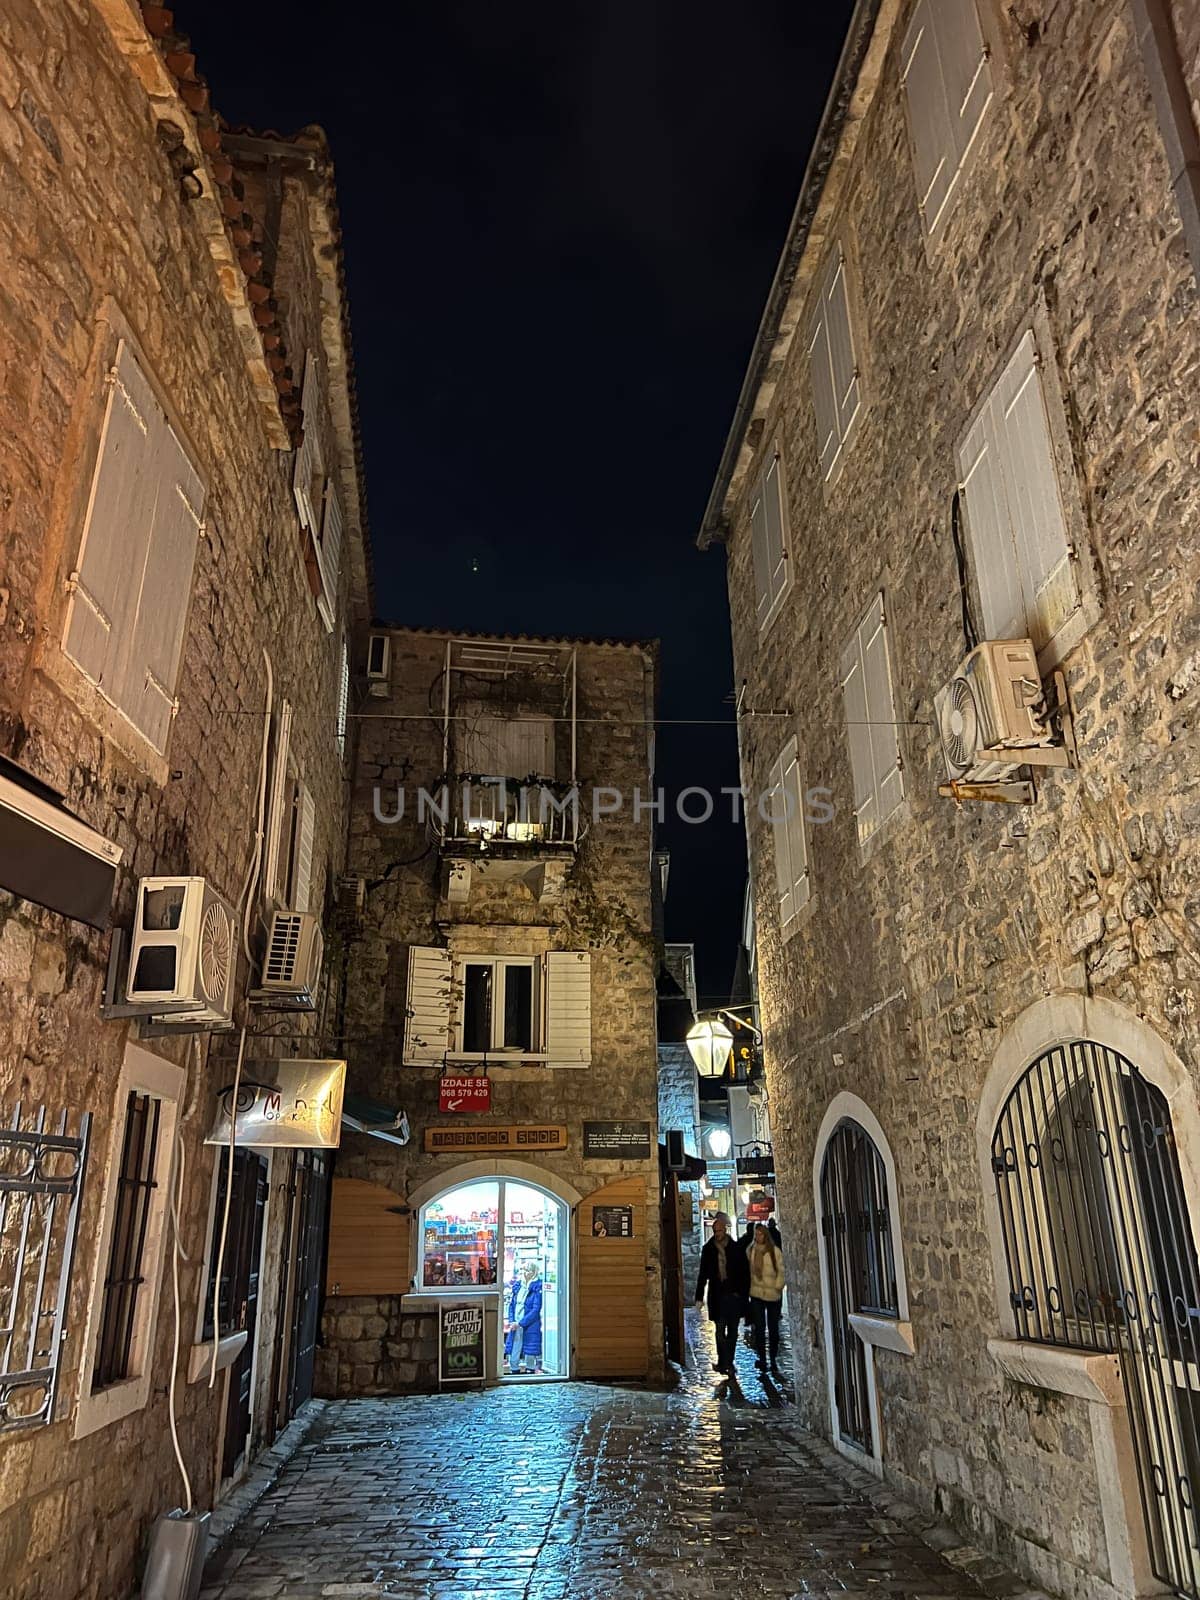 Narrow street of the ancient town illuminated by lanterns. High quality photo